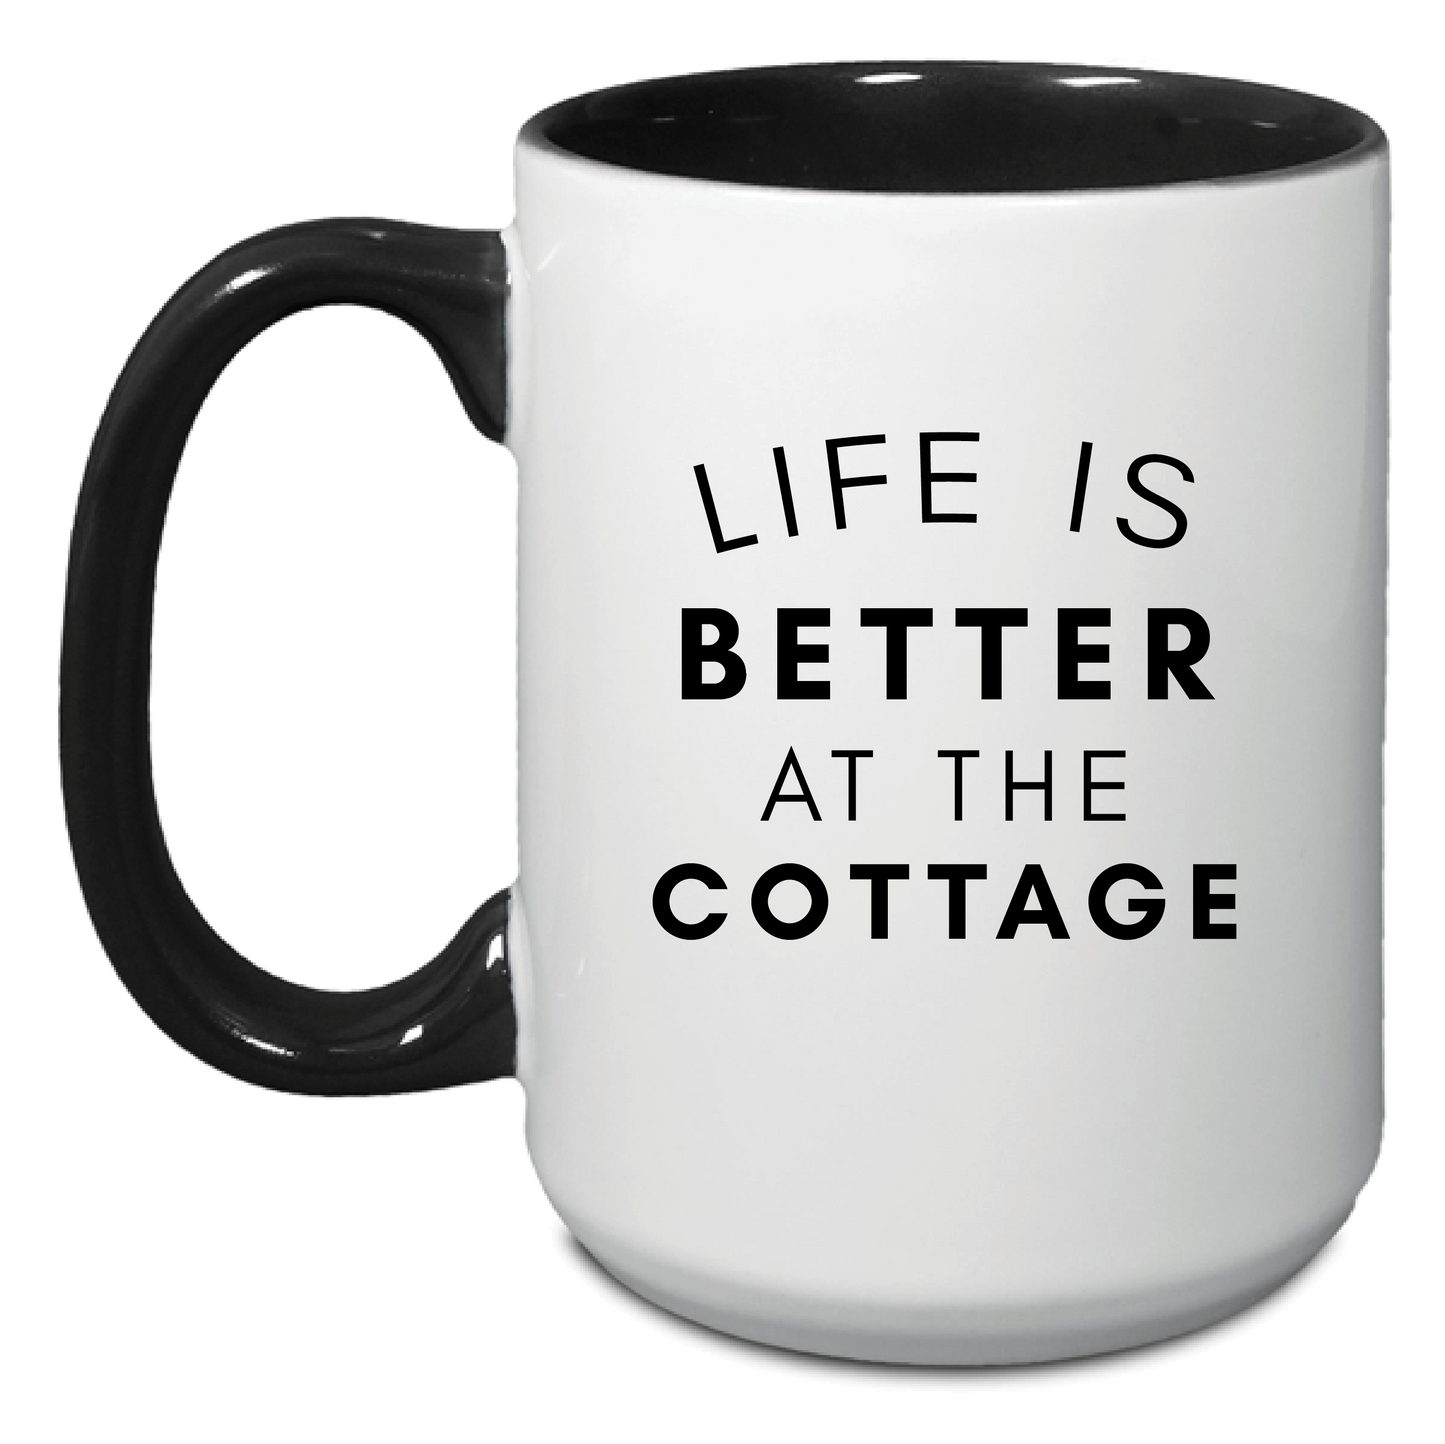 Life is Better at the Cottage mug